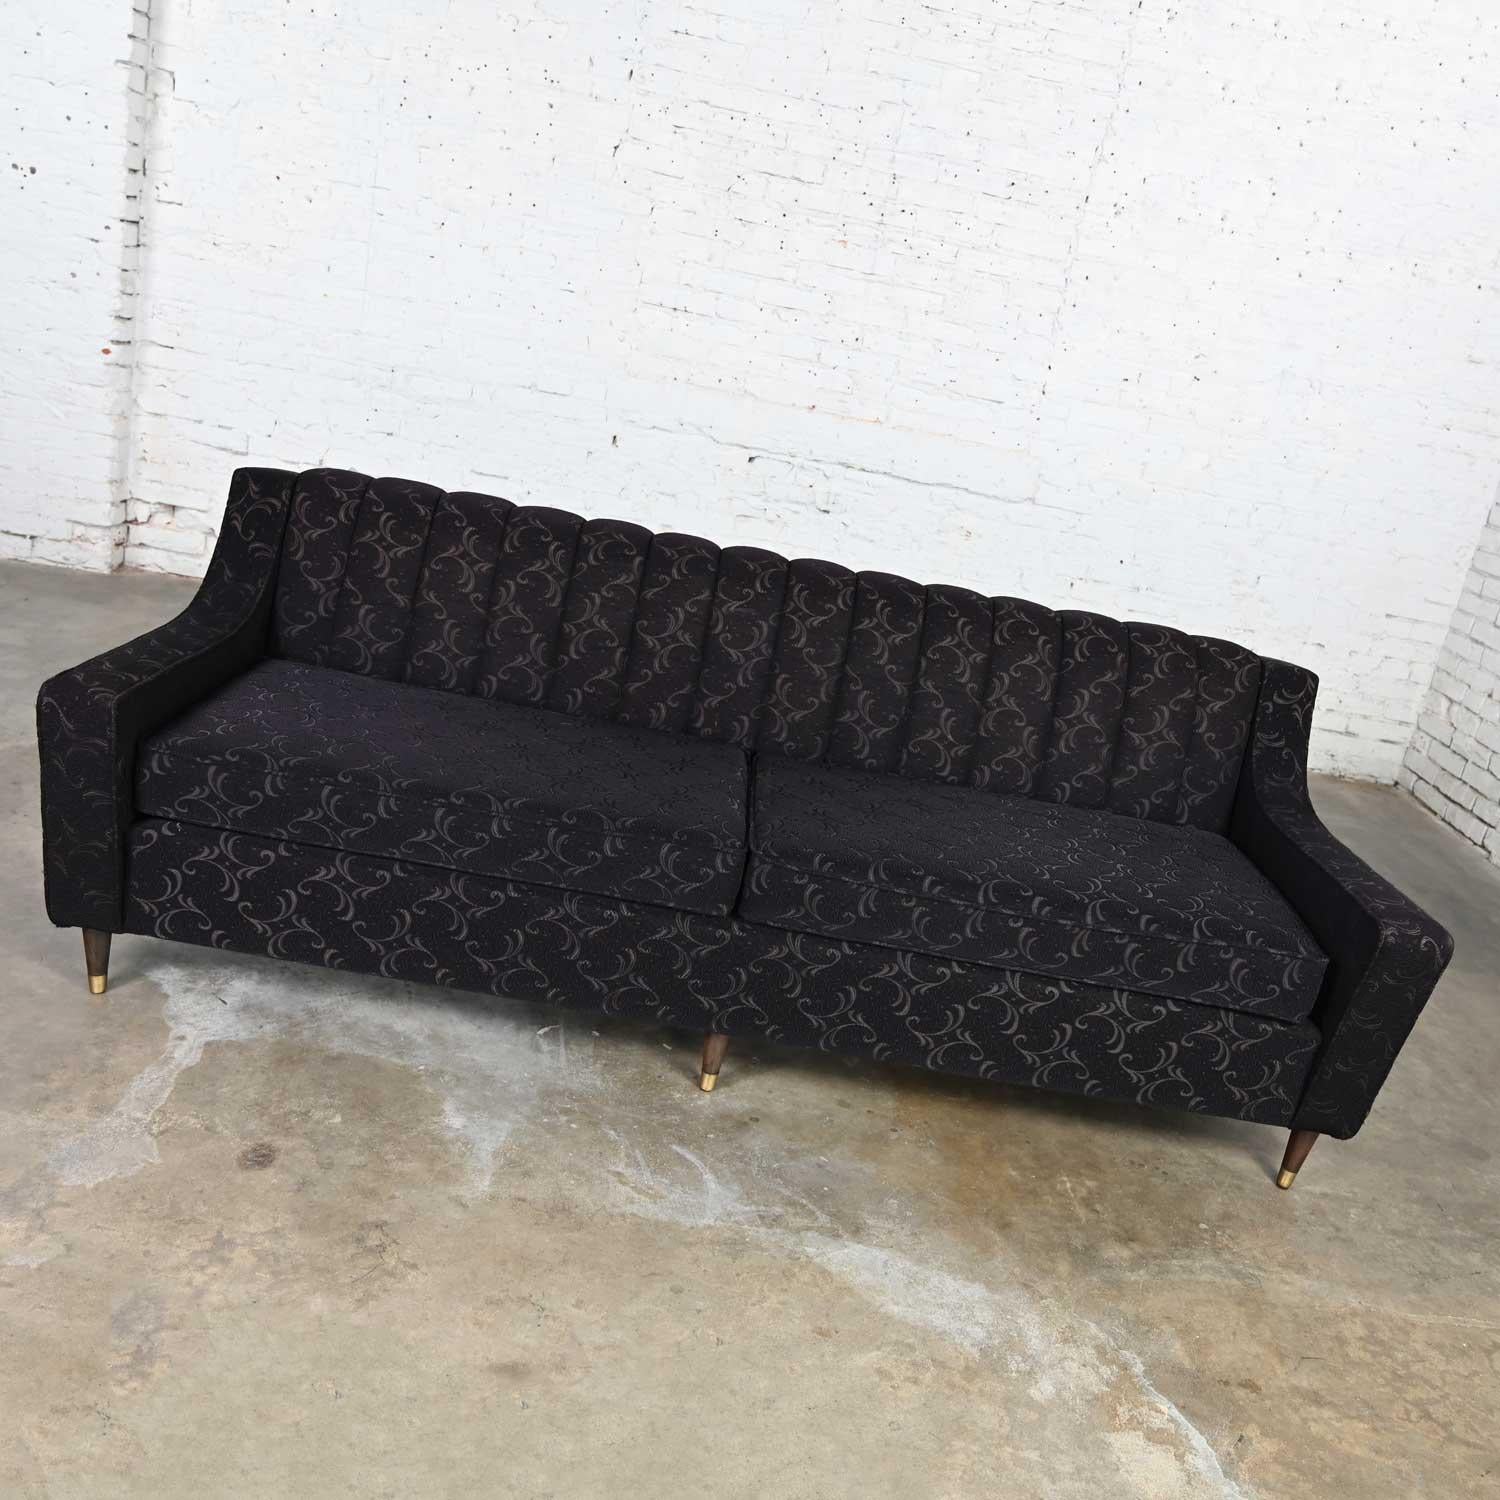 Stunning vintage mid-century modern modified Lawson style sofa with a channeled back, black frieze fabric, round tapered walnut legs and brass sabots. Beautiful condition, keeping in mind that this is vintage and not new so will have signs of use